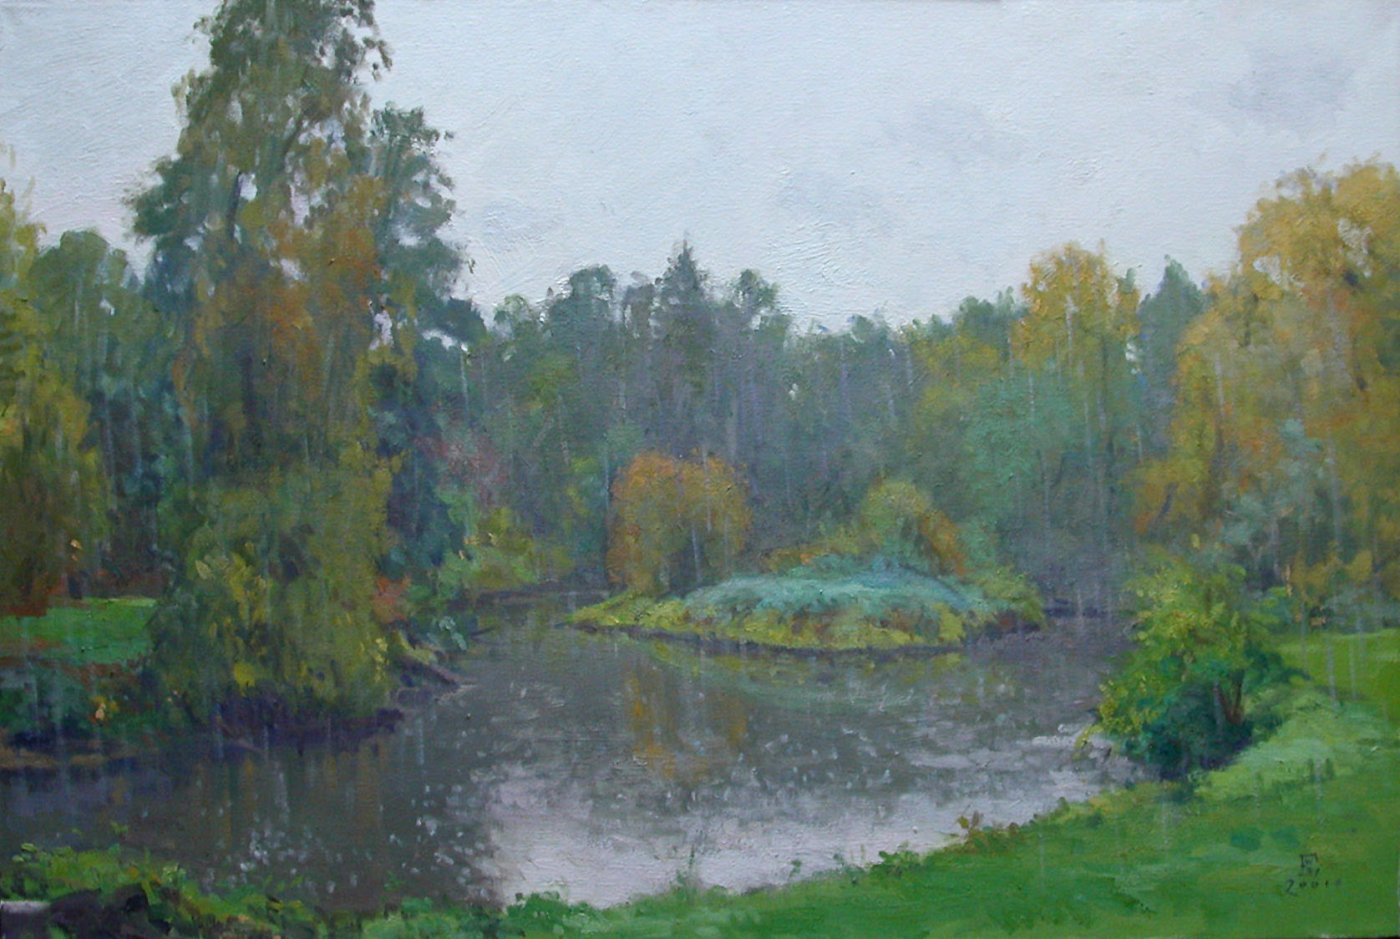 I Wish It Would Rain, oil on canvas, 24 X 36 inches, copyright ©2001